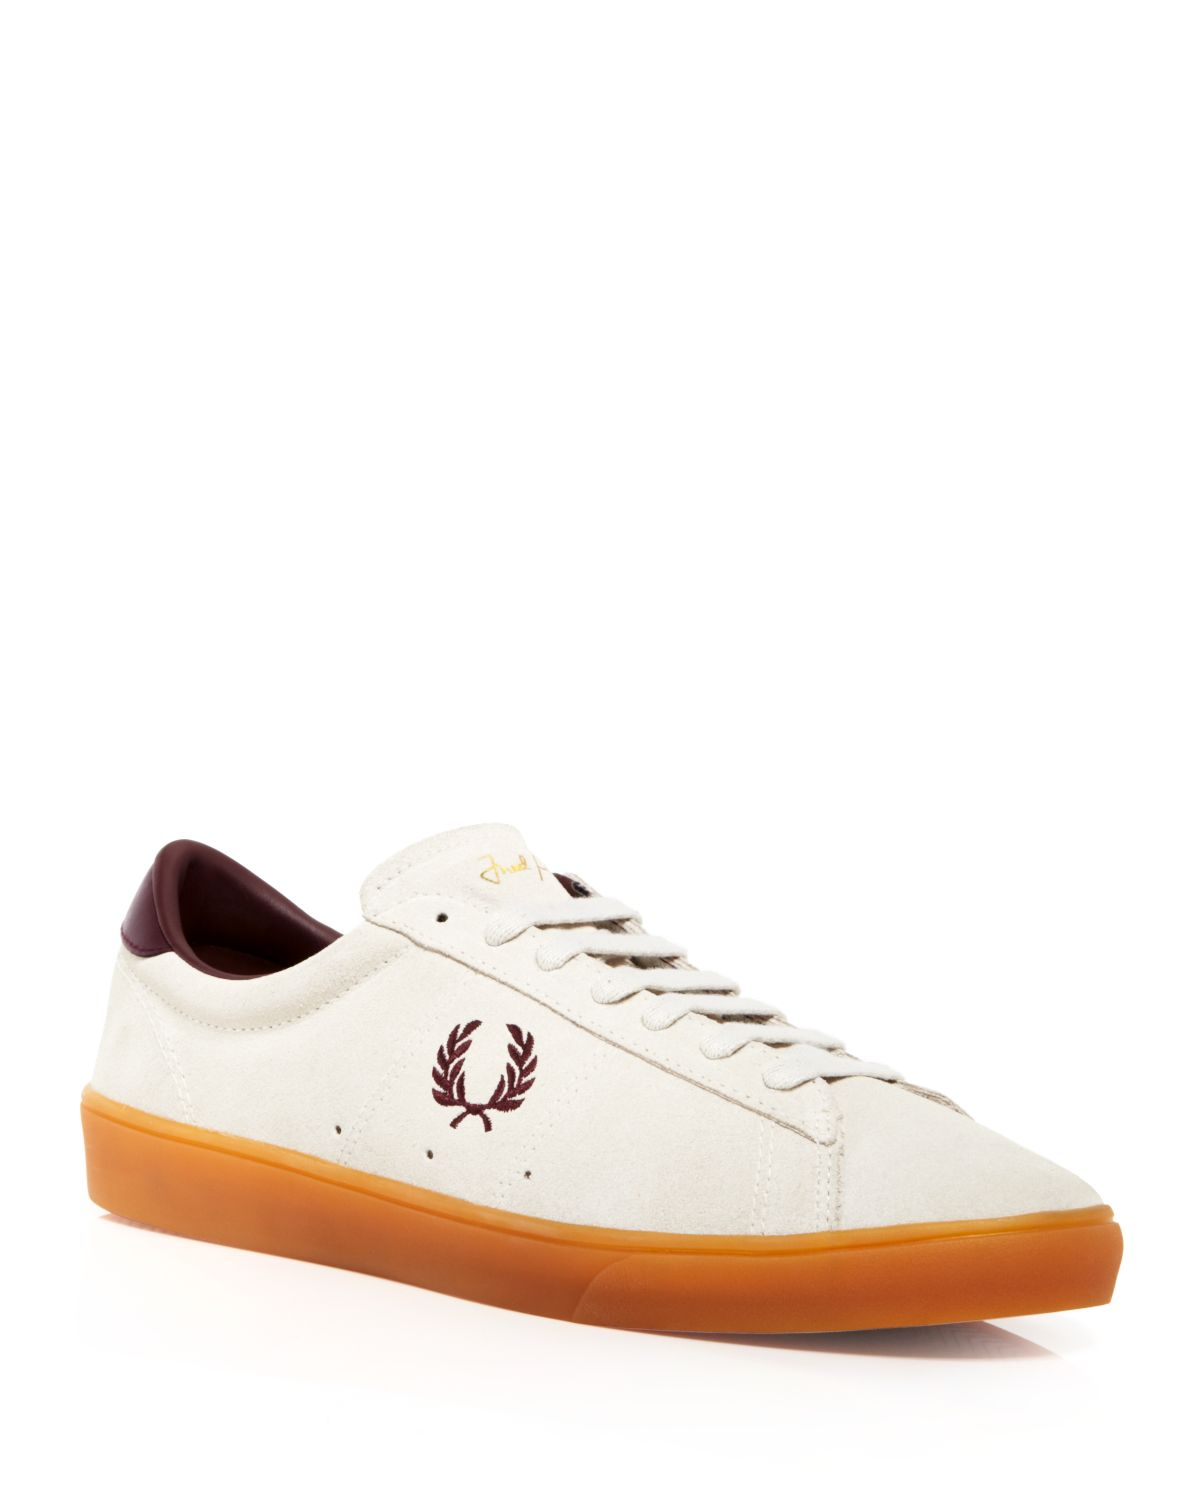 Fred Perry Spencer Suede Sneakers in Brown for Men Lyst